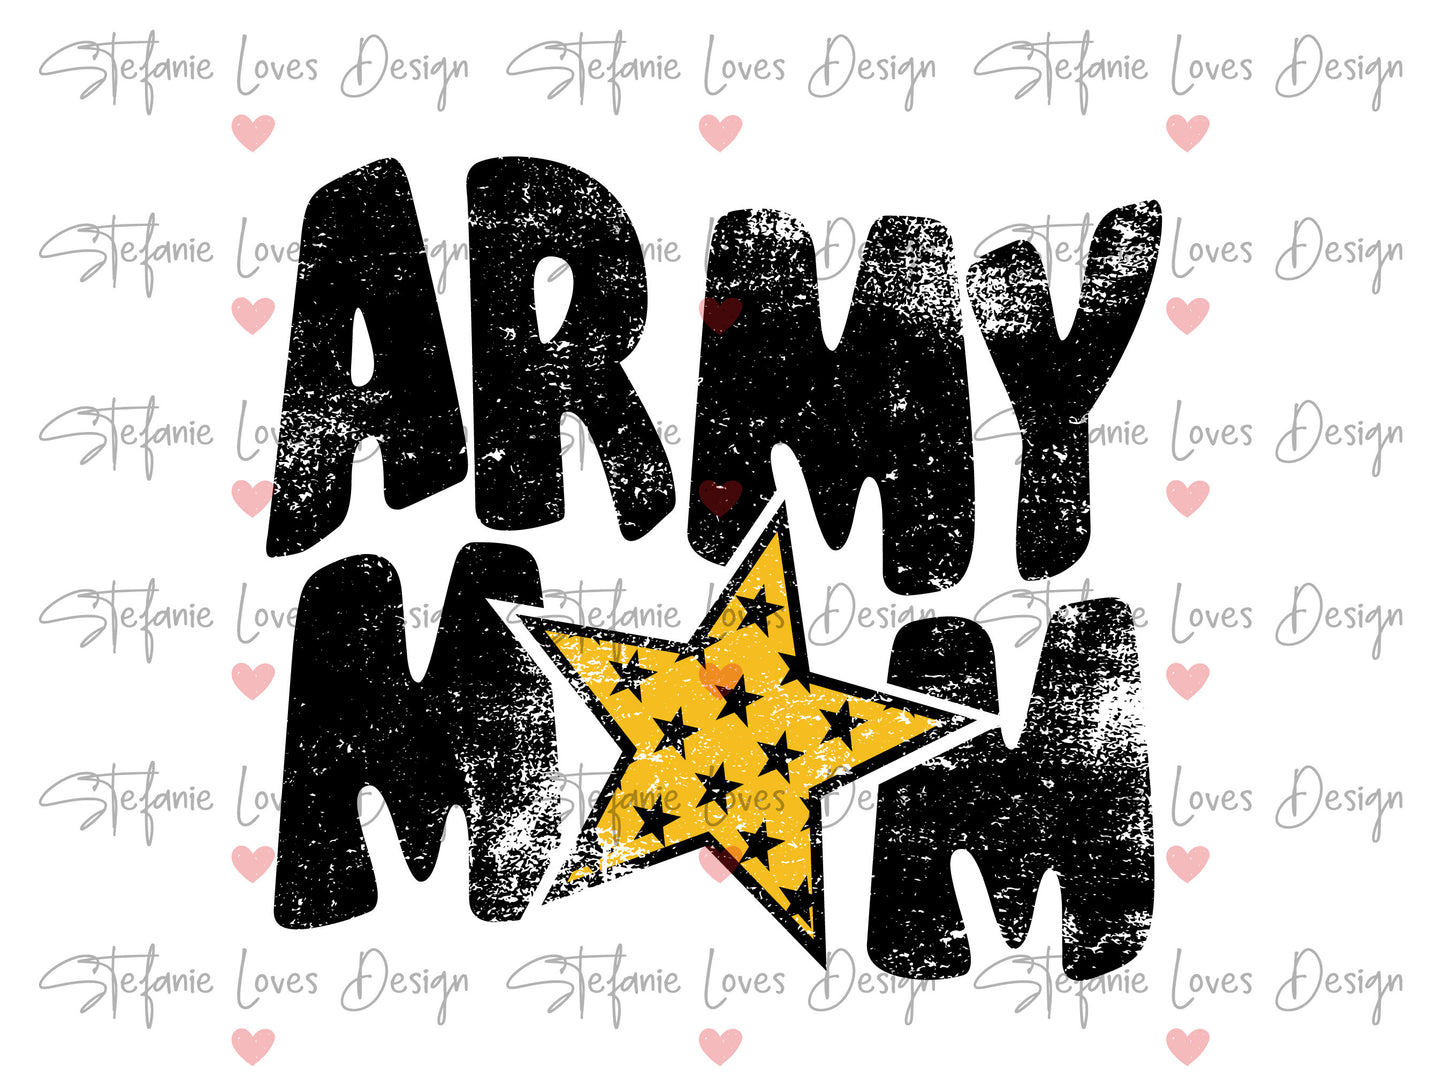 Army Mom png, Military Mom png, Army Mom Shirt png, Military Mama Tee, Digital Download, Deployment Mom